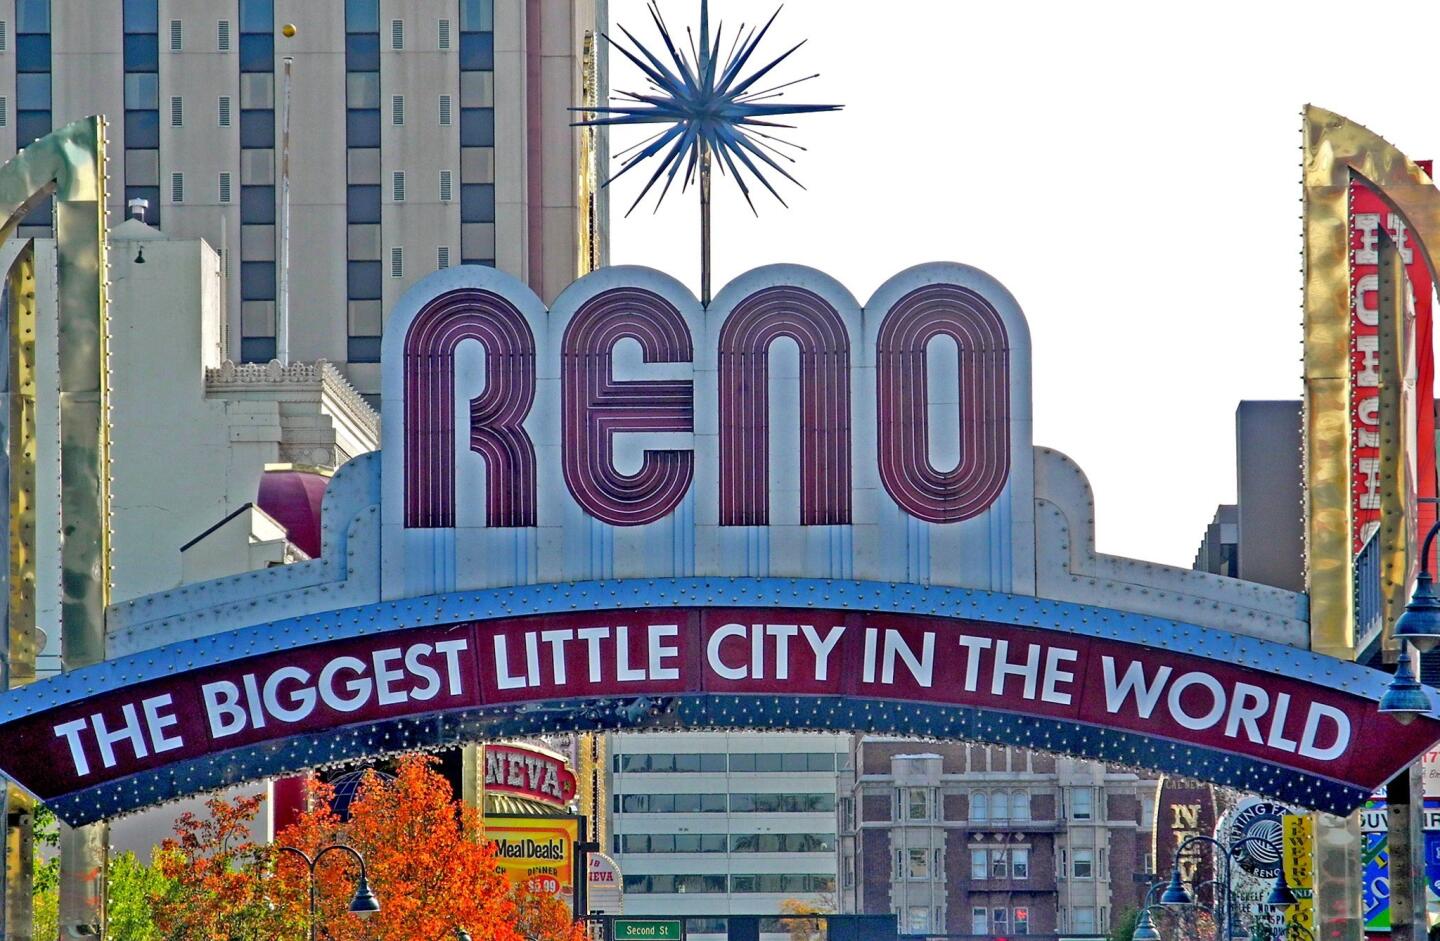 Reno's well-known welcome sign.